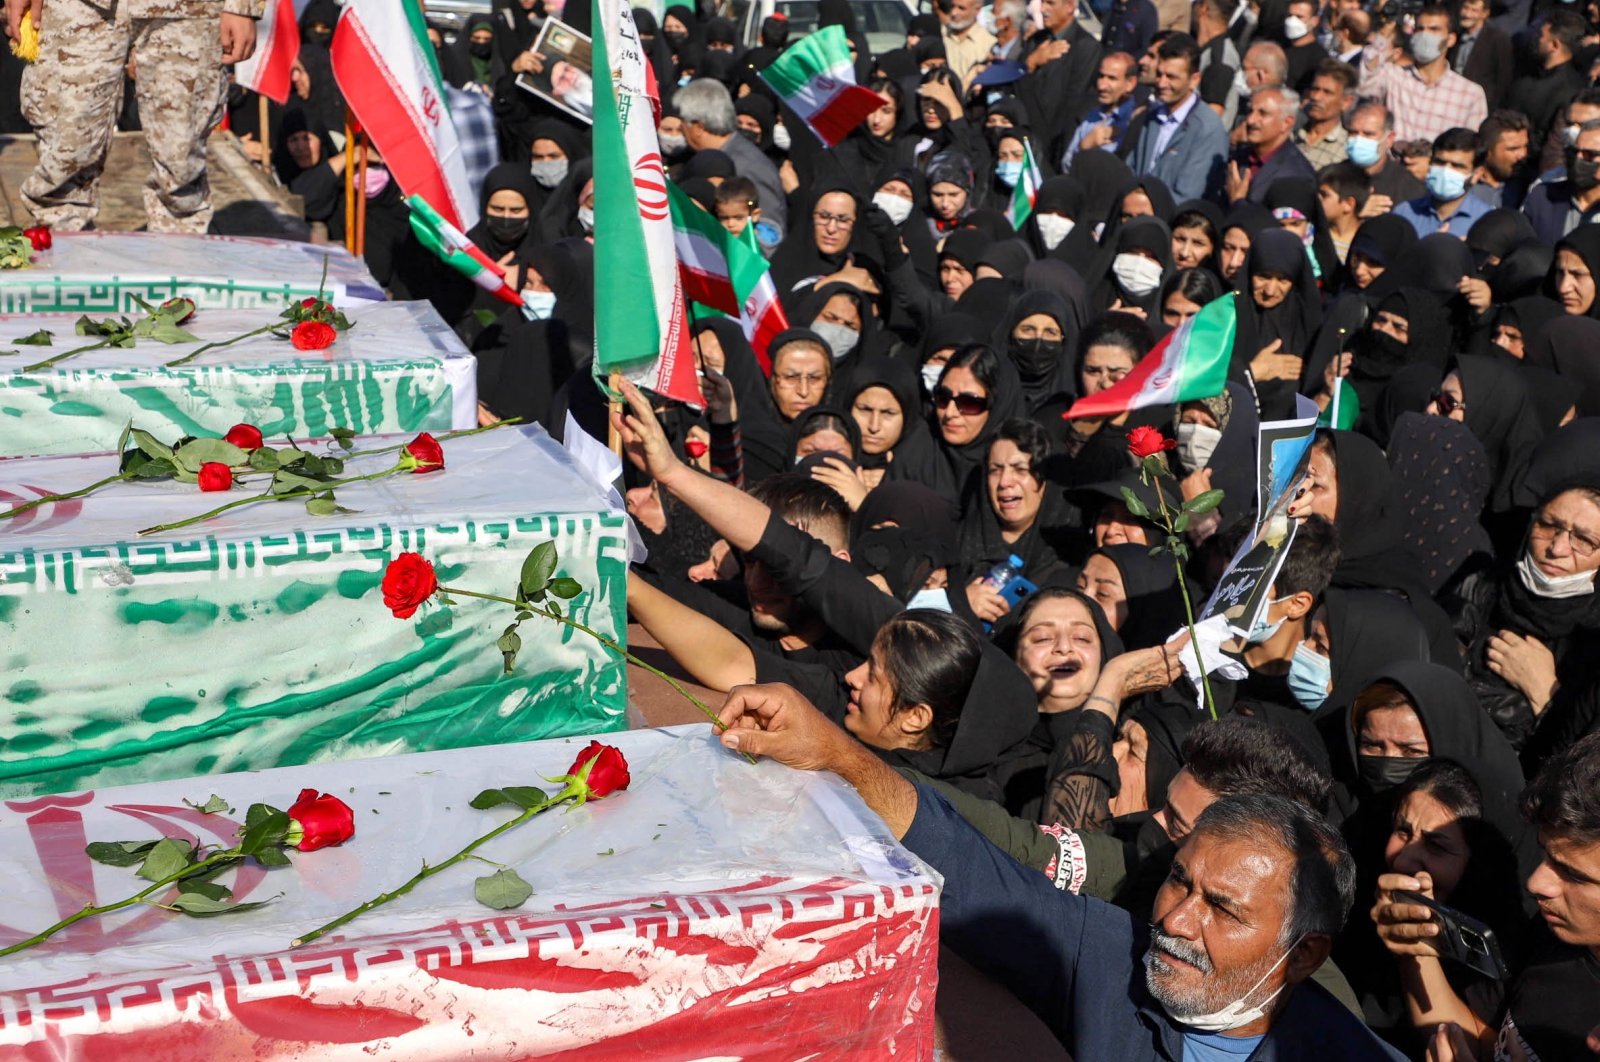 Iranians mourn in front of the coffins of people killed in a shooting attack, during their funeral in the city of Izeh in Iran&#039;s Khuzestan province, on Nov. 18, 2022. In some of the worst violence since the protests erupted, assailants on motorbikes shot dead seven people, including a woman and two children aged 9 and 13, at a central market of Izeh on the evening of Nov. 16, 2022, state media said. (AFP Photo)